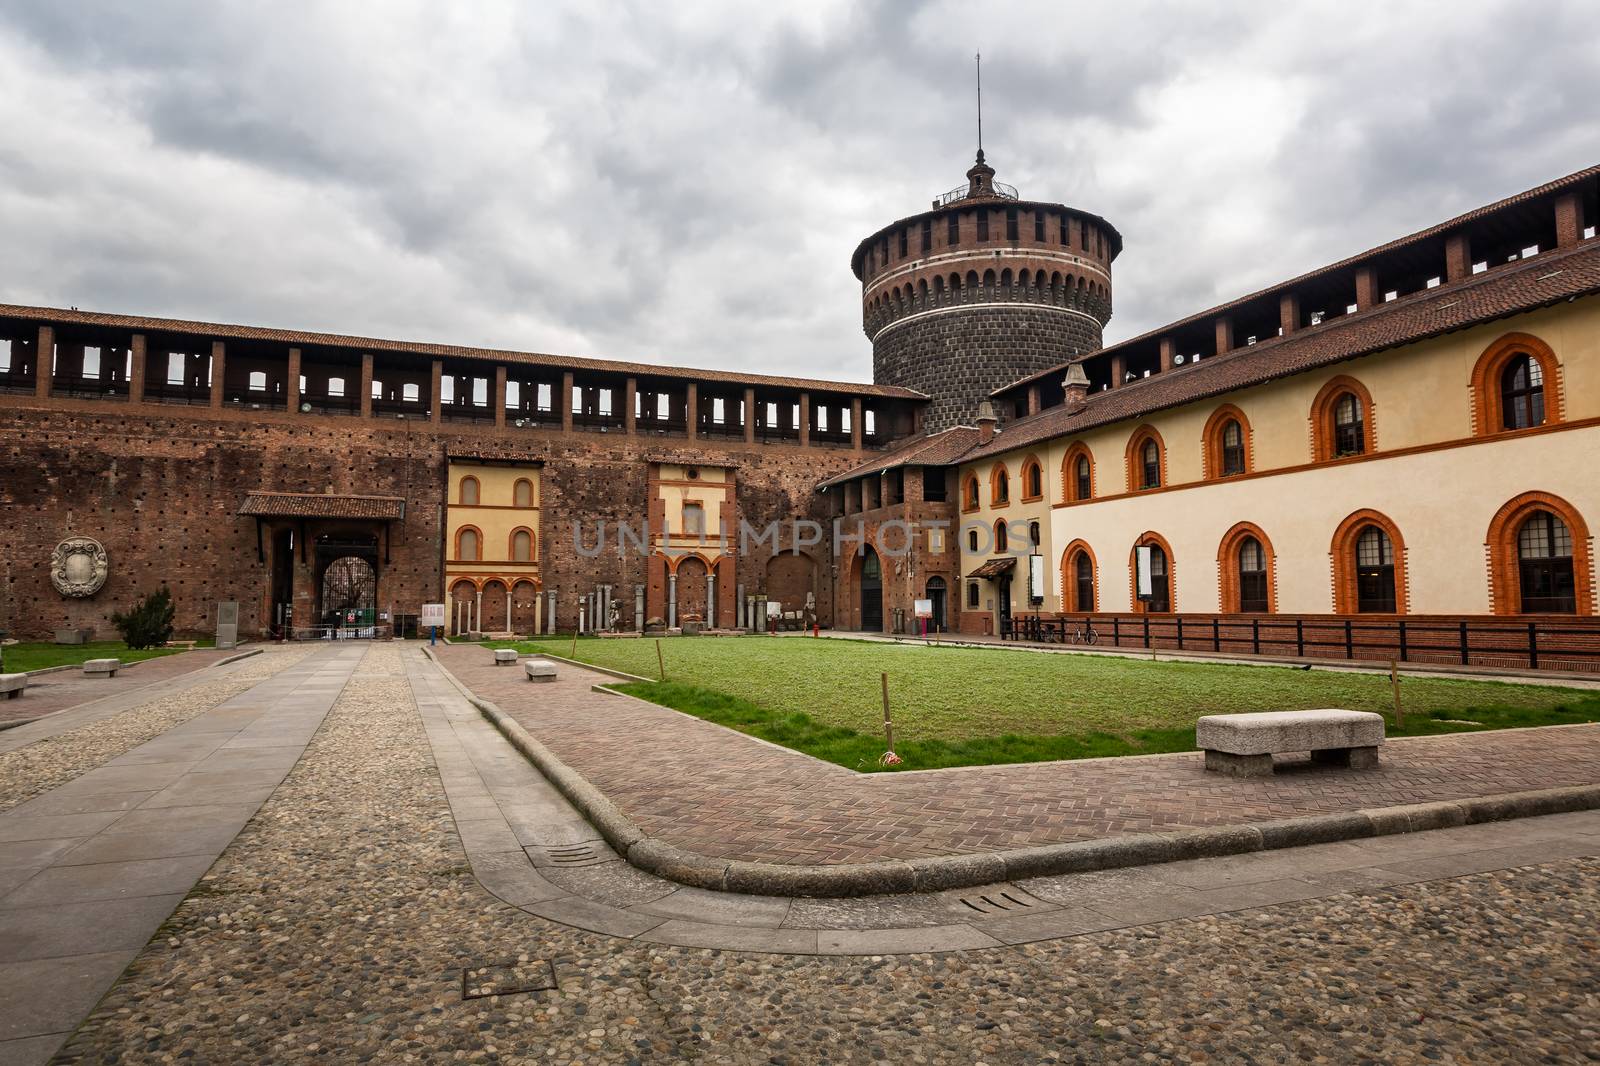 The Wall and Towers of Castello Sforzesco (Sforza Castle) in Mil by anshar